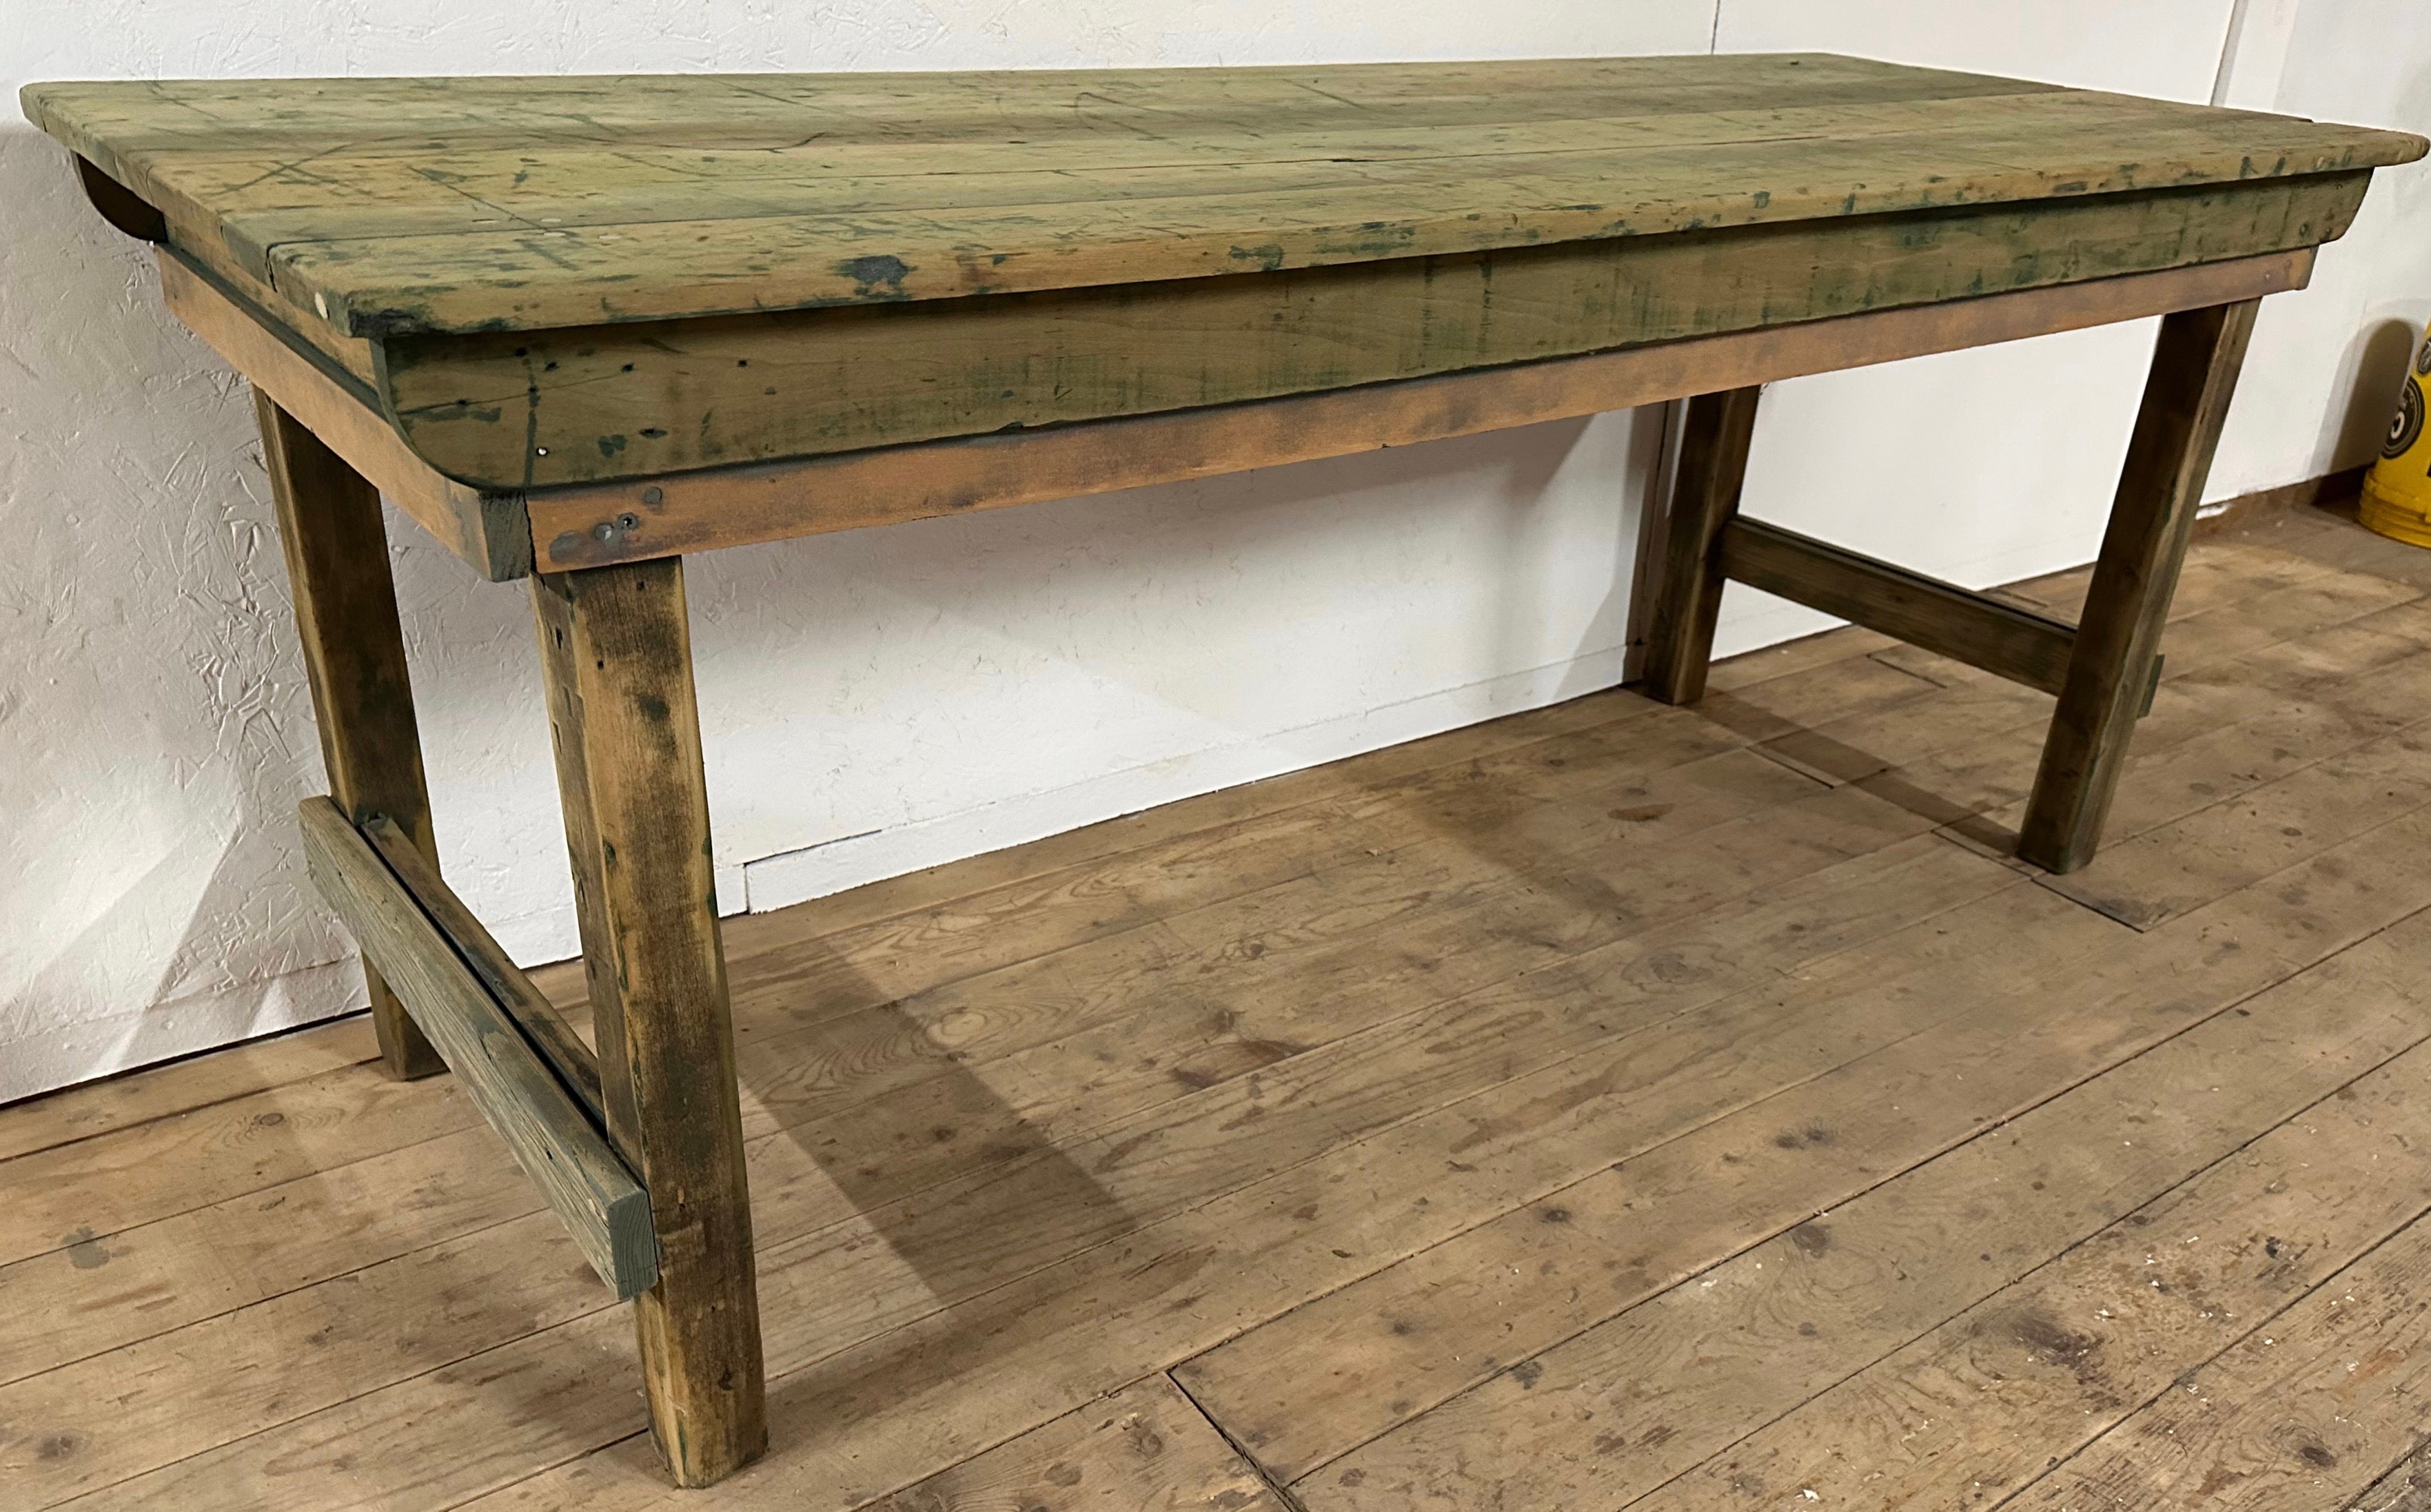 This rustic antique farm house work, dining harvest table, once painted but much of the residue of the original paint still remains for added charm and character. The plank table top offers a rich, warm antique wood color and tone. 

The simple